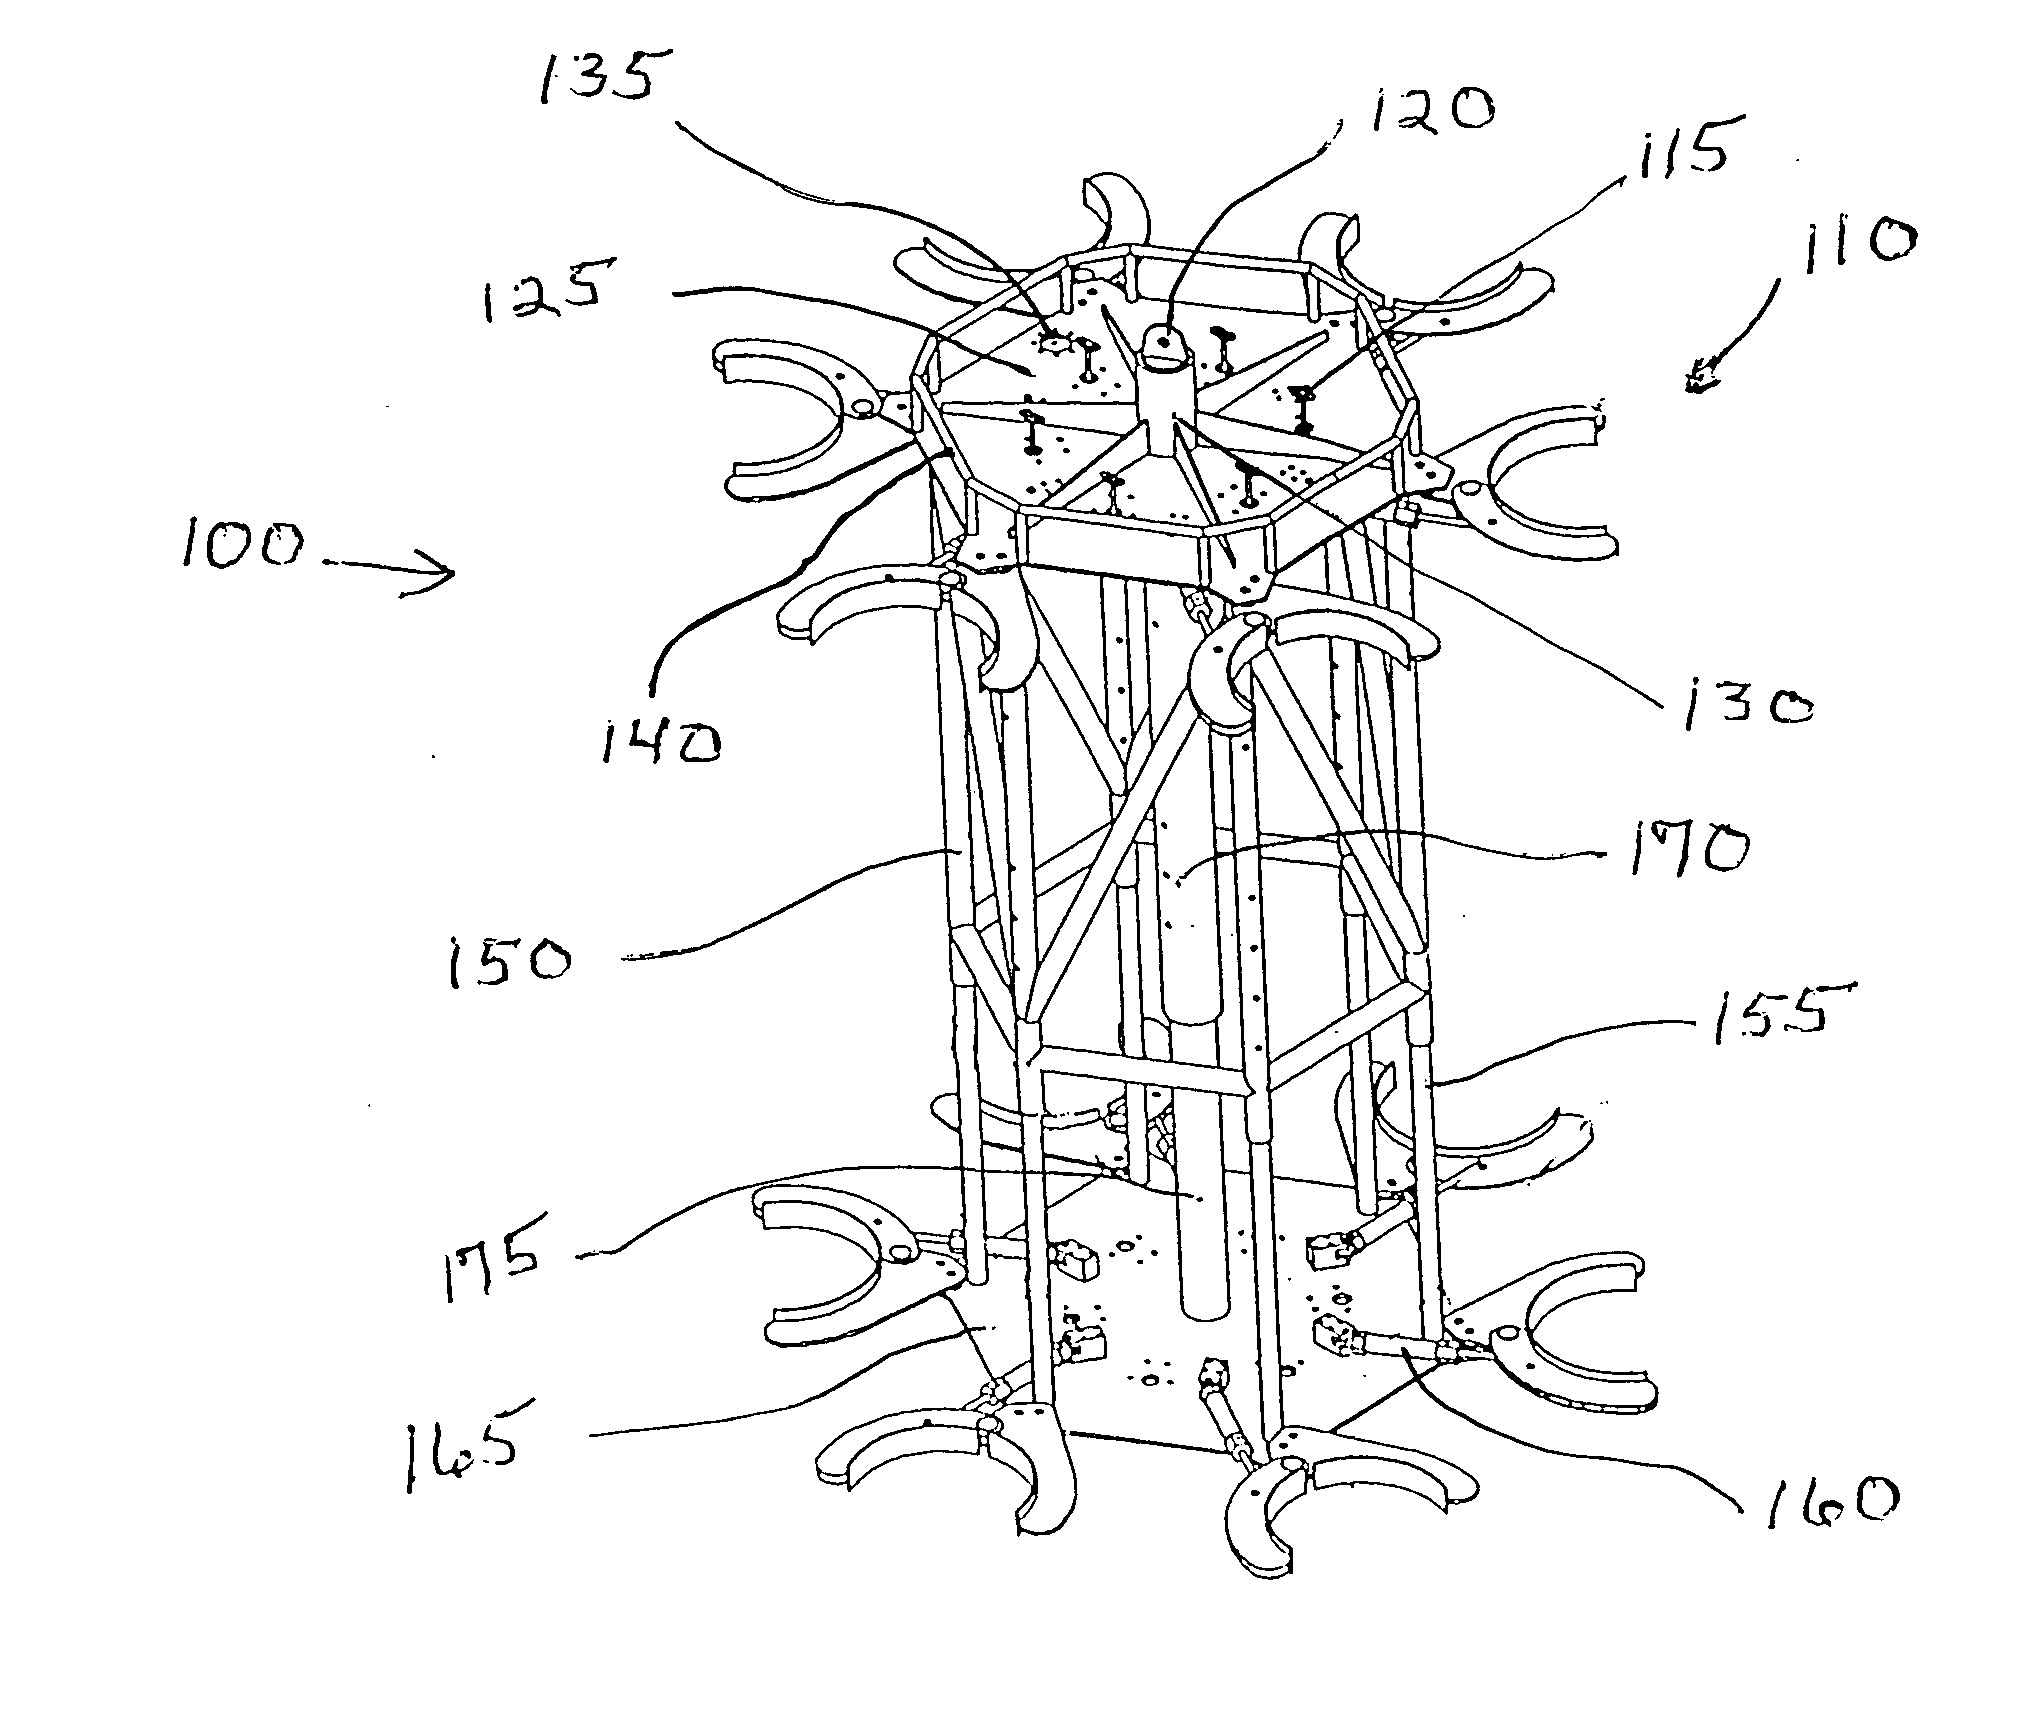 Apparatus and methods for remote installation of devices for reducing drag and vortex induced vibration